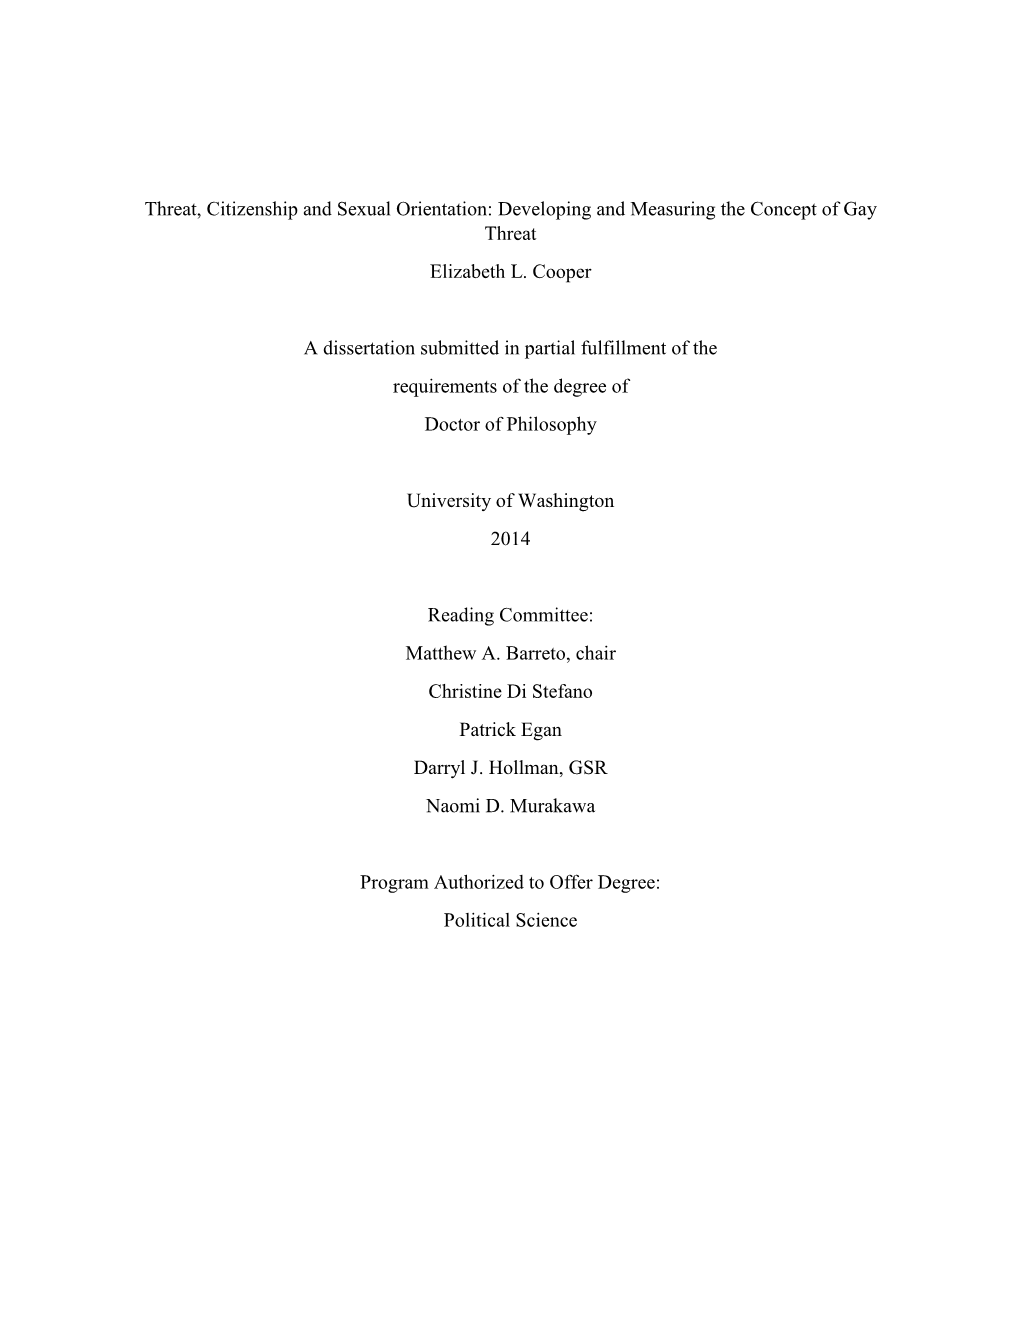 Threat, Citizenship and Sexual Orientation: Developing and Measuring the Concept of Gay Threat Elizabeth L